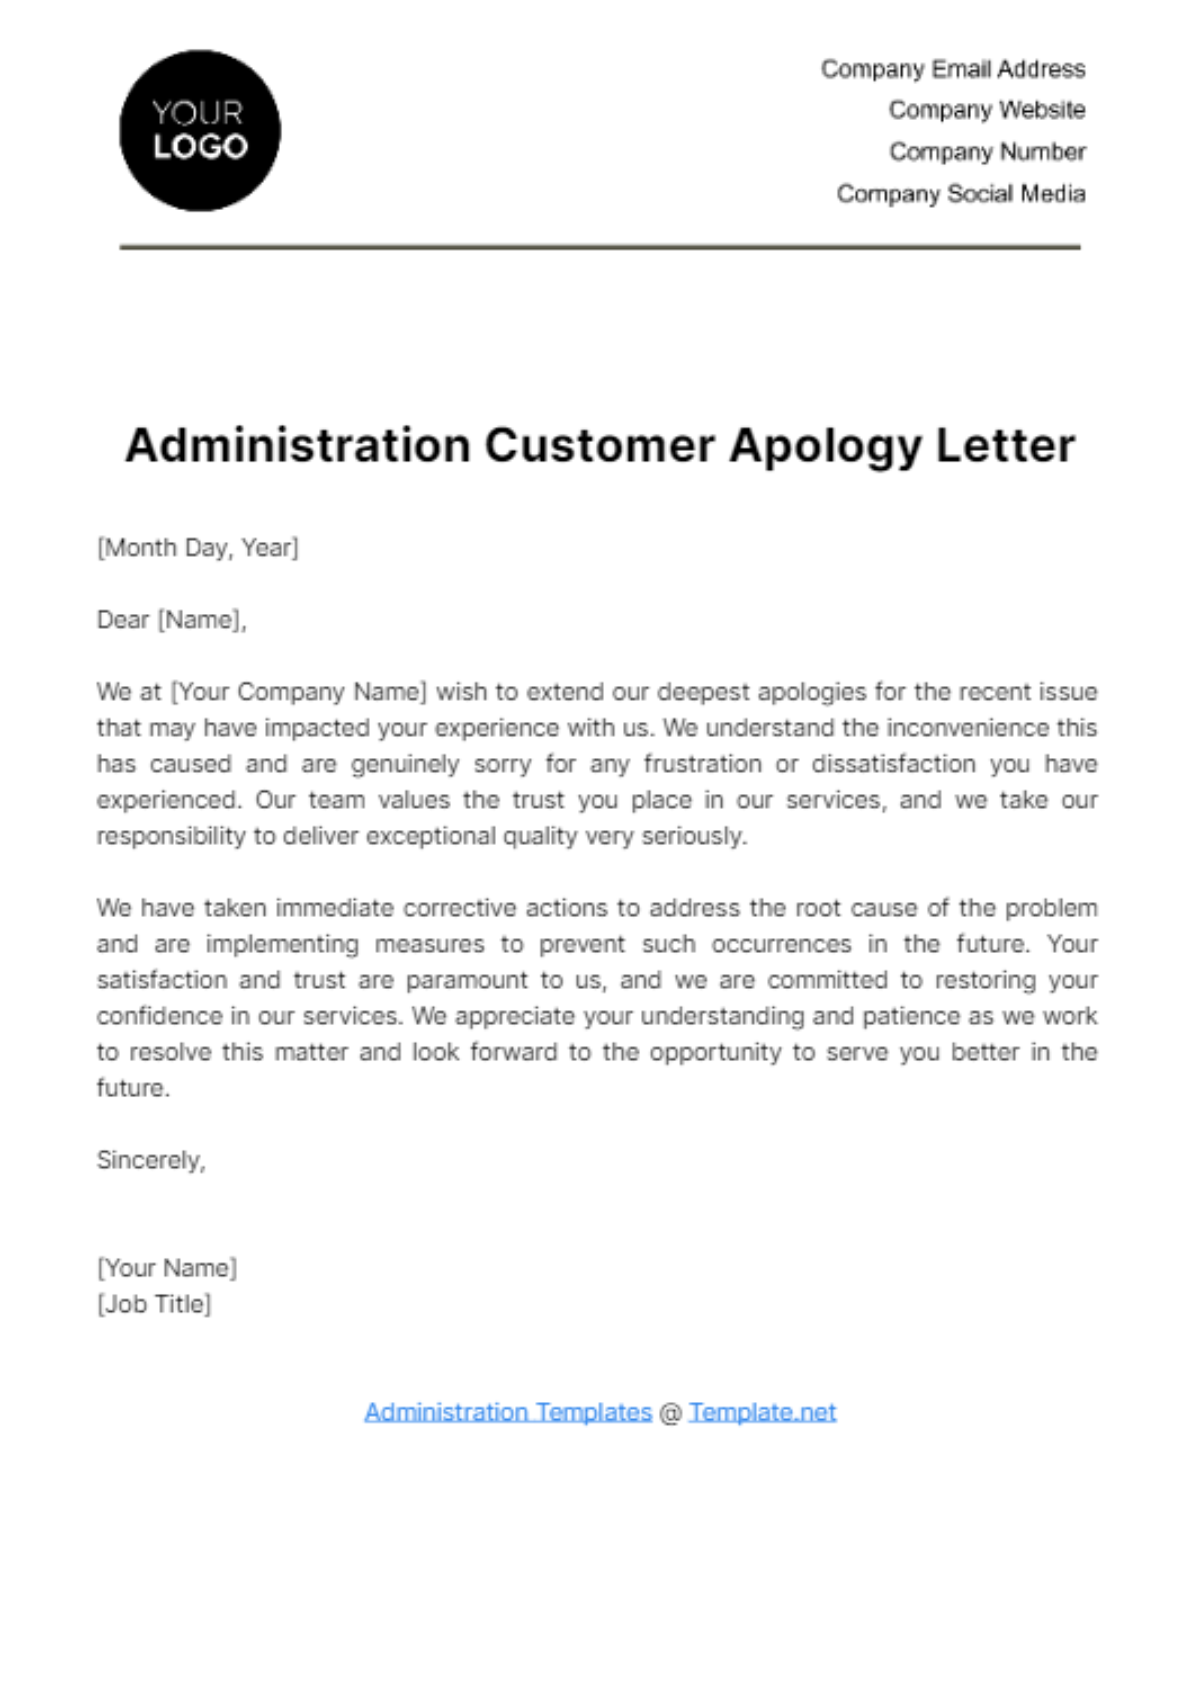 Free Administration Customer Apology Letter Template